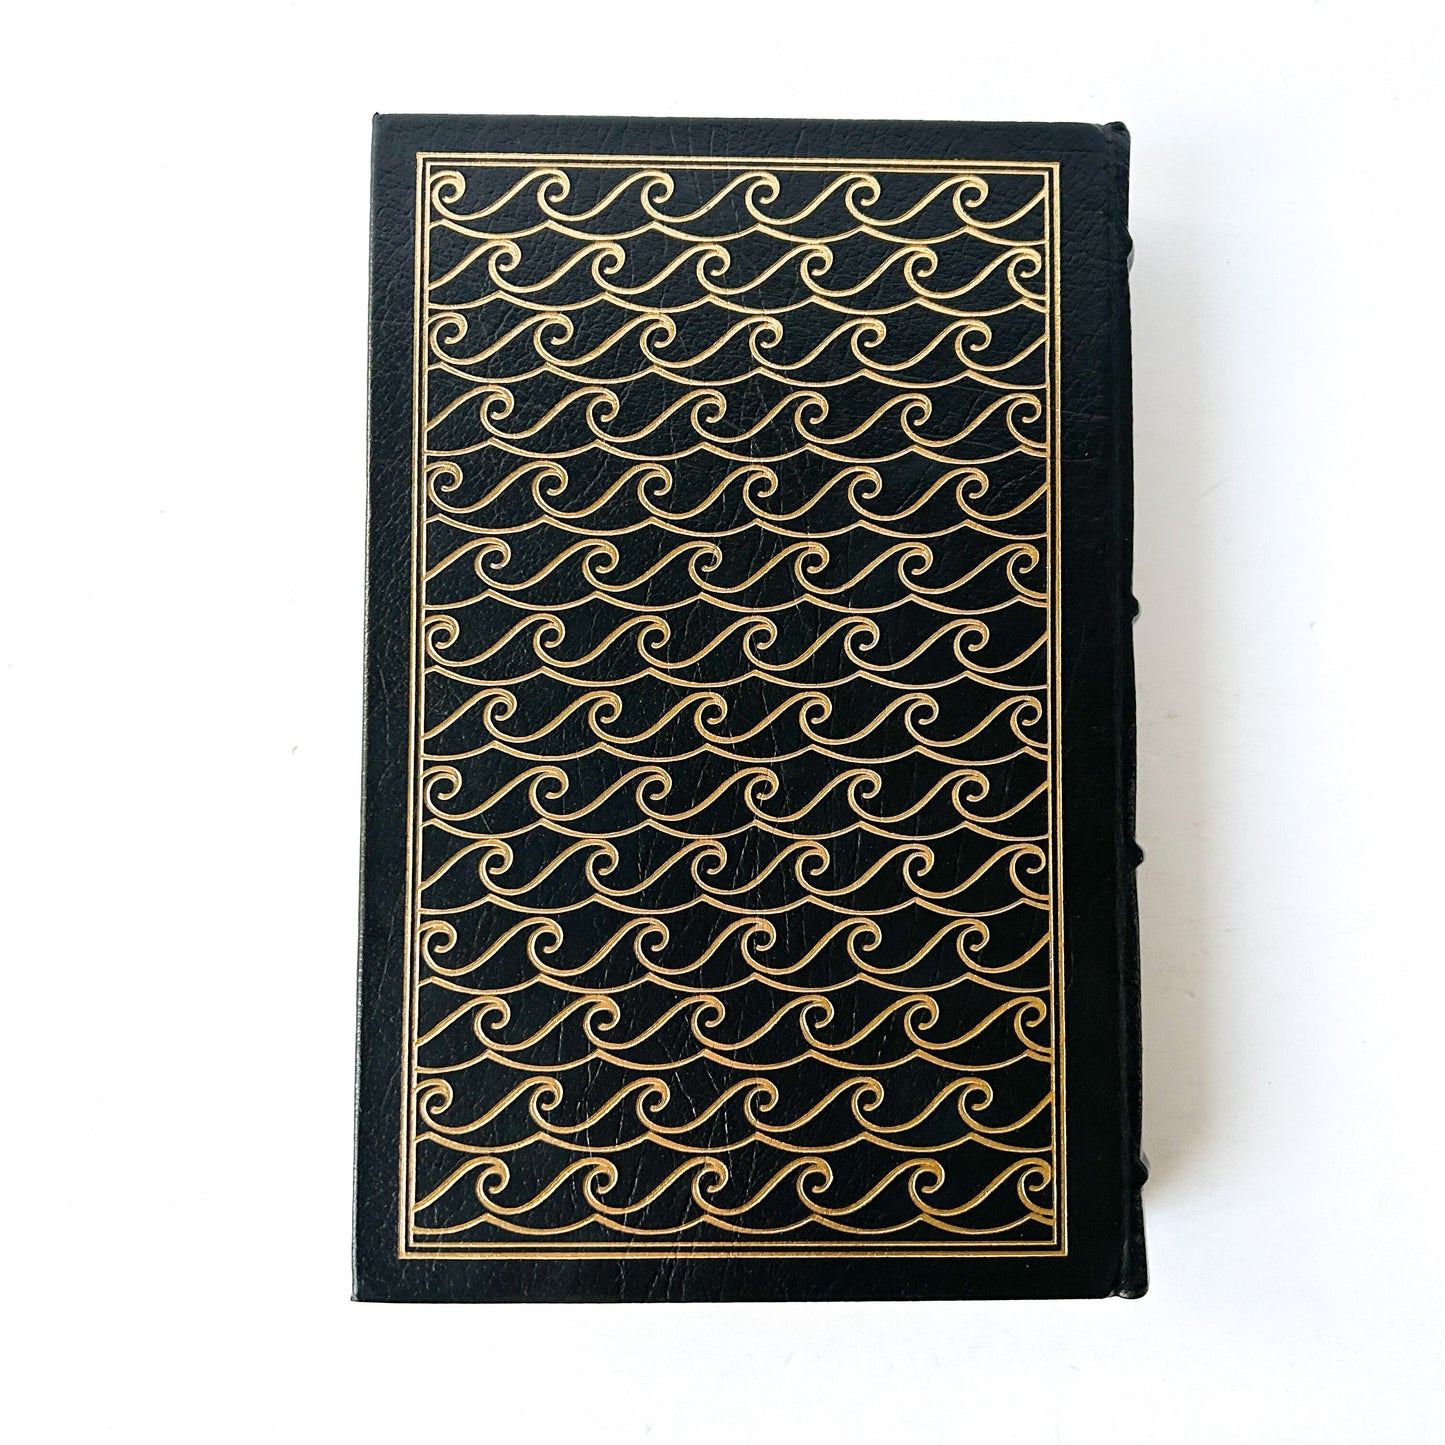 Vintage Moby Dick book, 1977 Easton Press edition